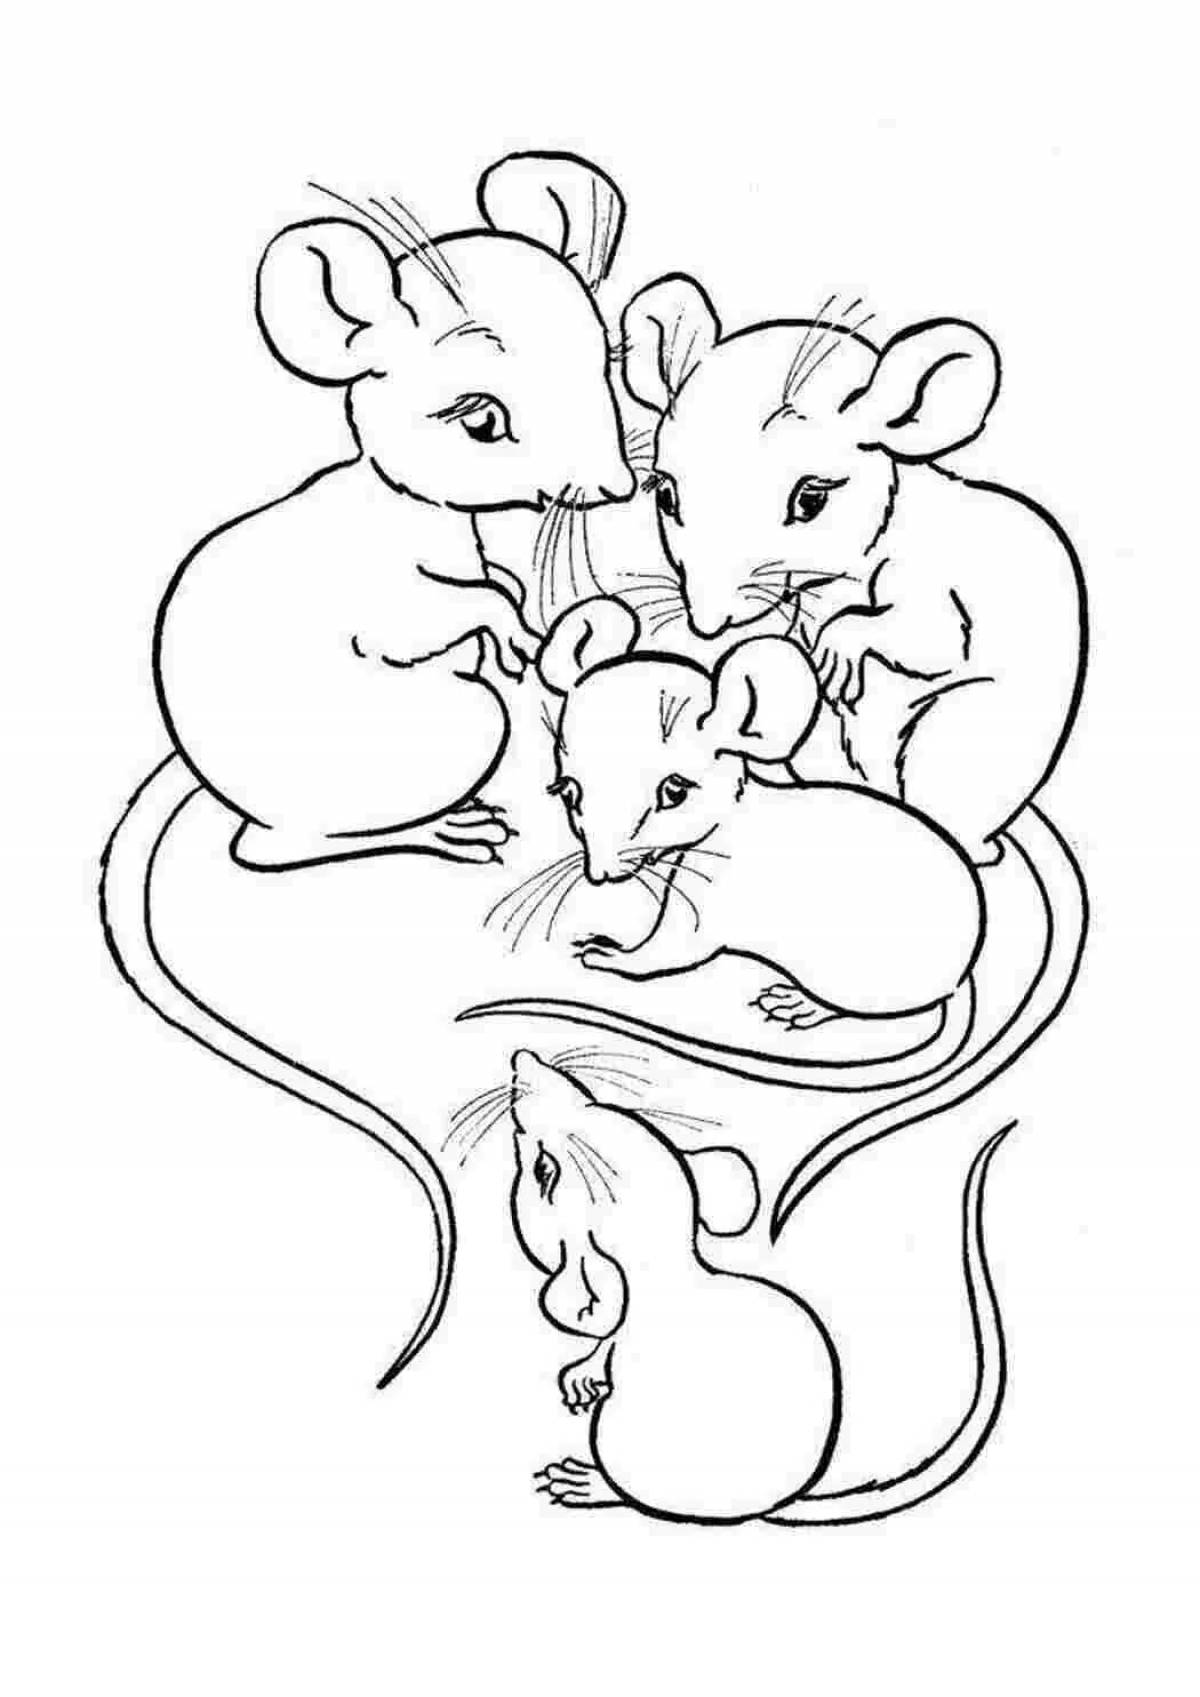 Playful mouse coloring book